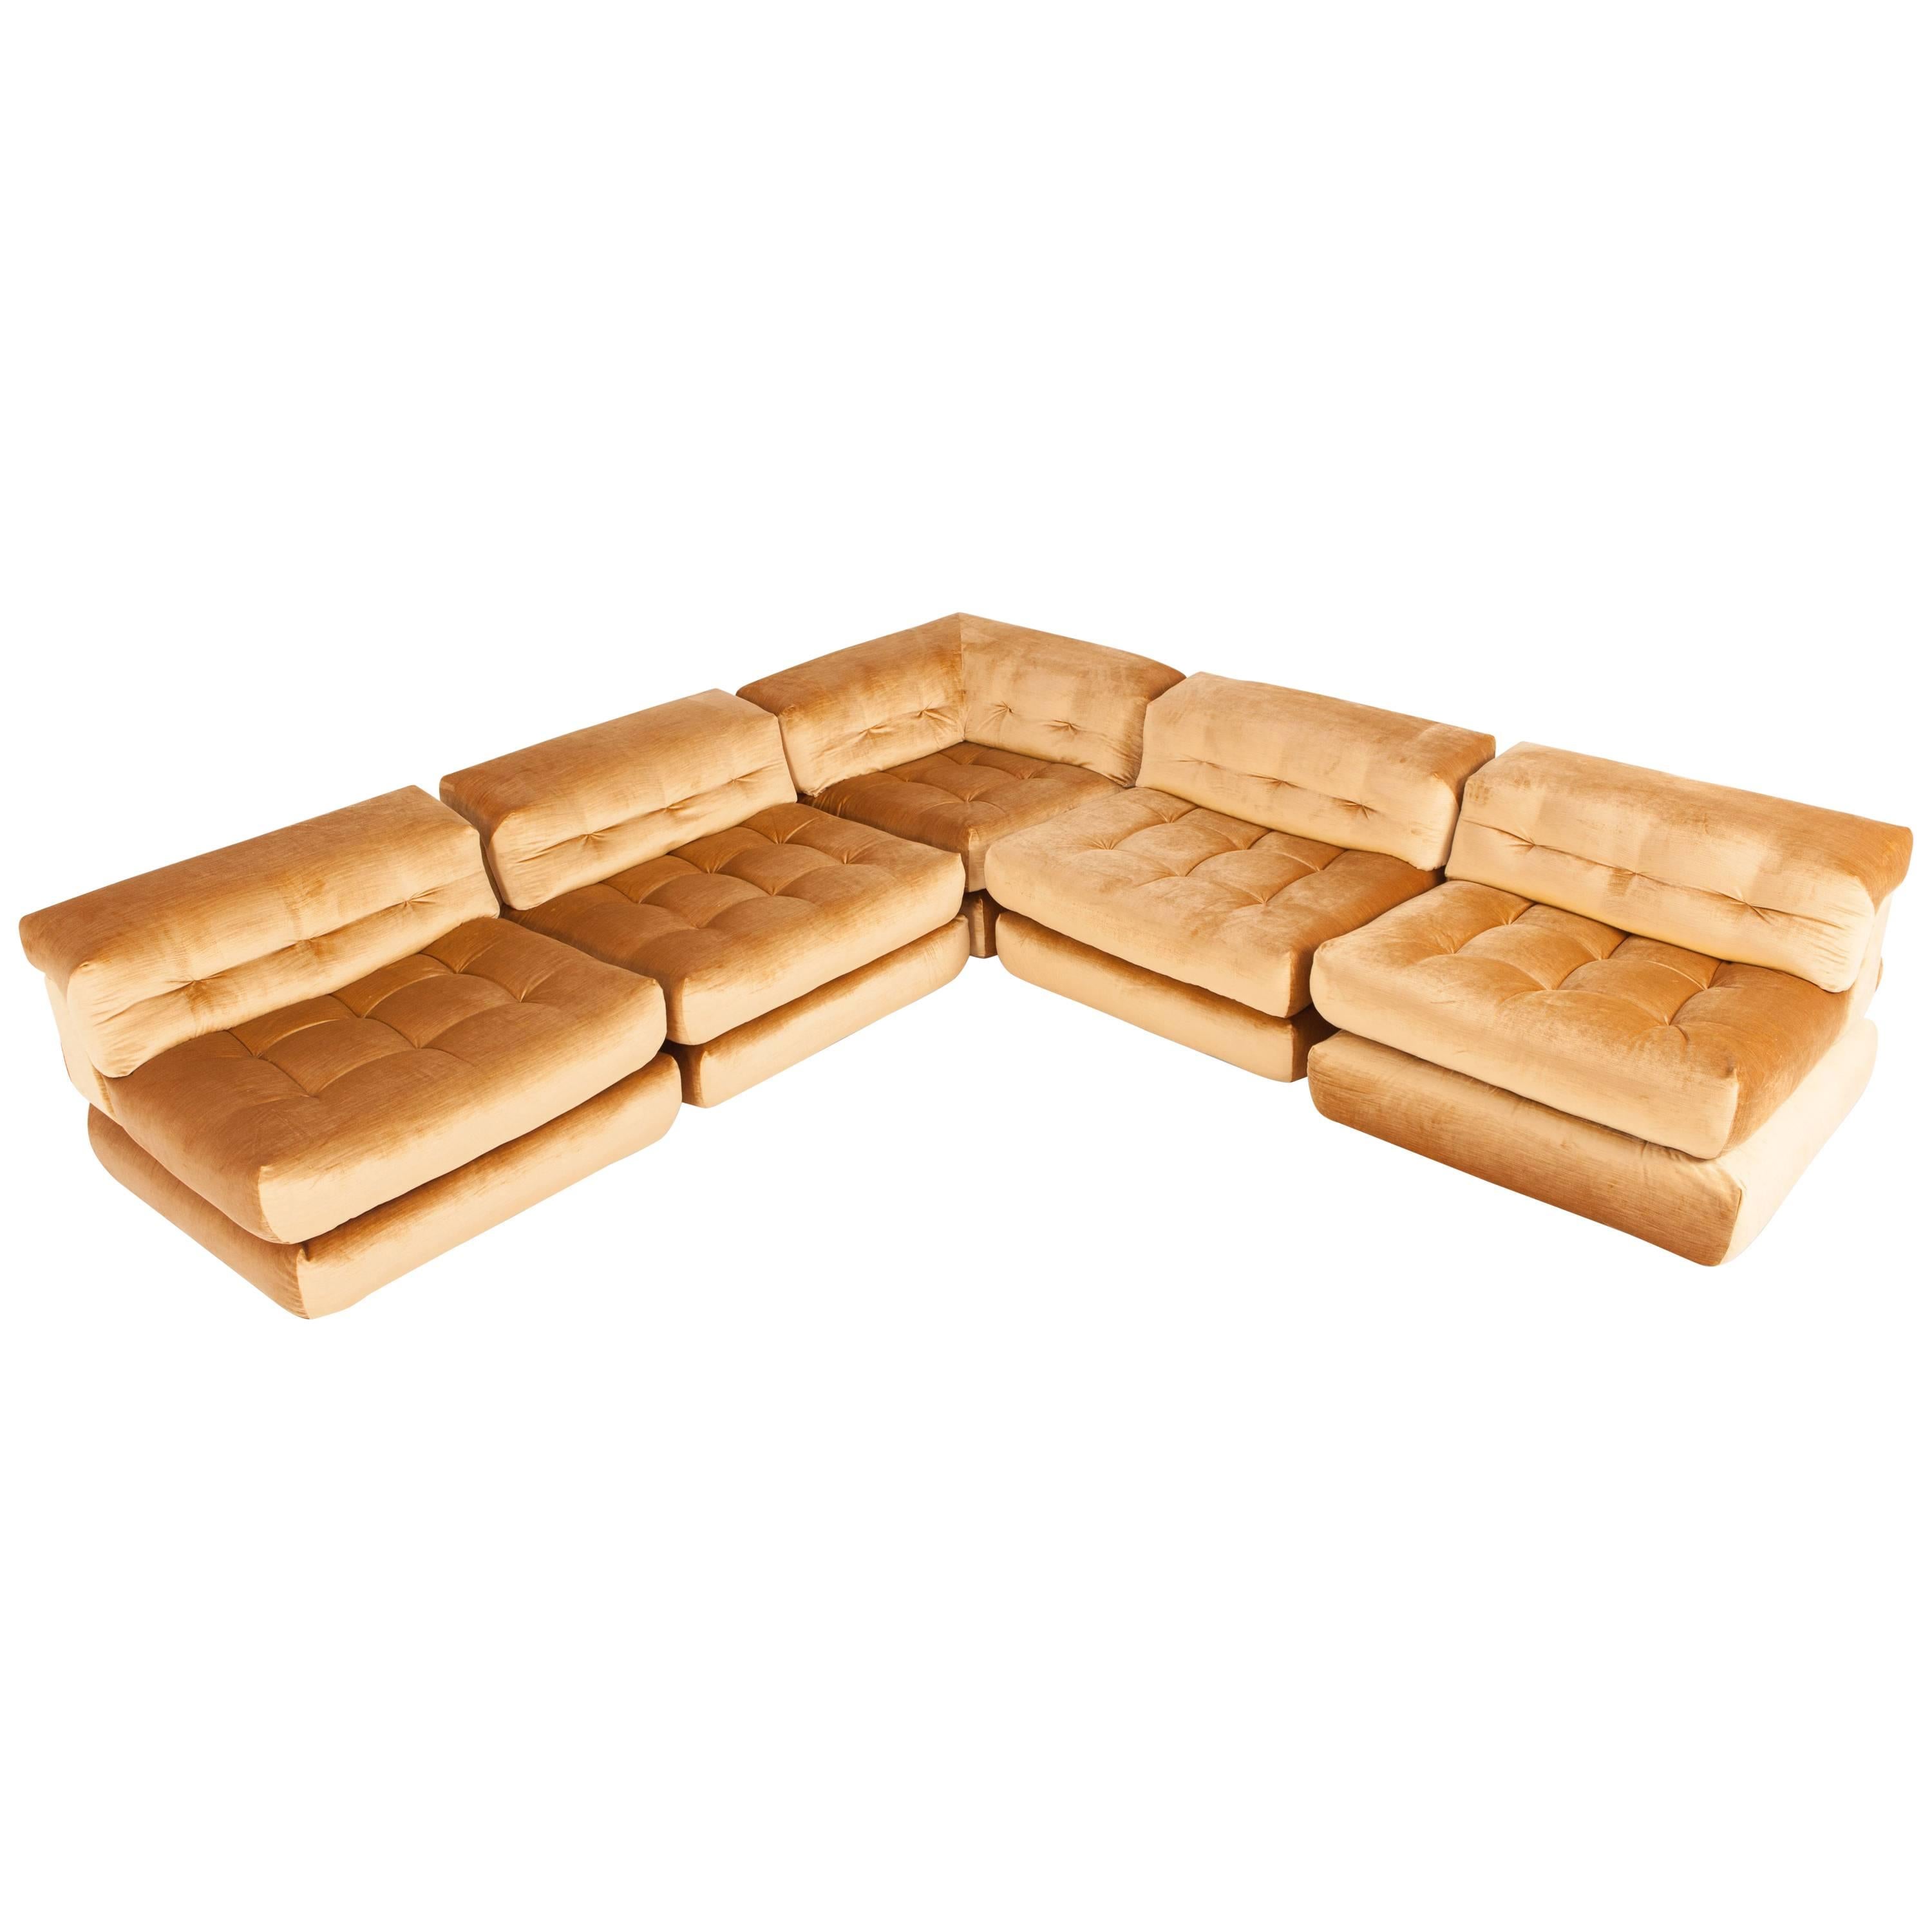 Hans Hopfer first edition Mah Jong modular sofa from the 1970s
by Hans Hopfer and Philippe Roche
reupholstered in golden velvet

In the 1970s Hans Hopfer created the Mah Jong lounge sofa, Roche Bobois’s most recognized and iconic design. The